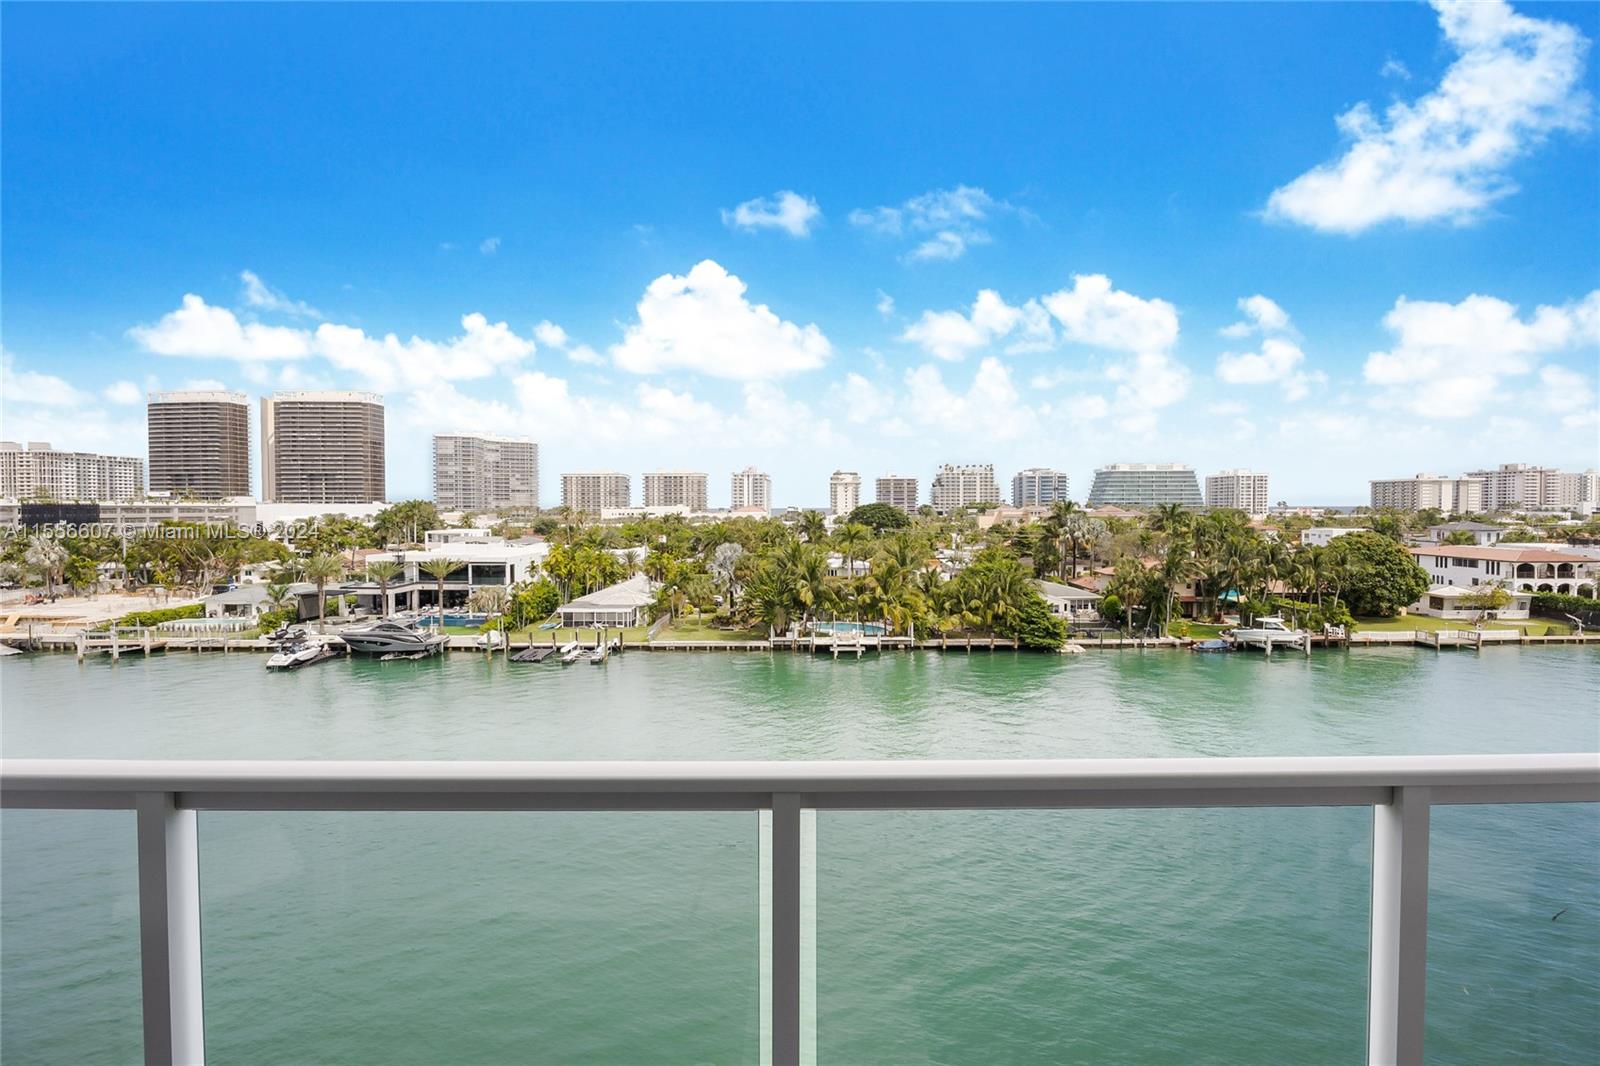 Experience breathtaking water views from the expansive balcony of this renovated London Towers condo, nestled in picturesque Bay Harbor Islands. This generously sized condo with 1080 square feet features a modern kitchen, 1 large bedroom, and a beautifully renovated bathroom and half bath. Additional features include wood flooring, custom closets, and hurricane-impact windows and doors. London Towers has recently completed its 50-year recertification along with additional renovations that include a new lobby, elevators, hallways, and a resurfaced pool. With its waterfront pool and close proximity to the beach, Bal Harbour Shops, places of worship, and some of the finest restaurants, this condo offers an unmatched lifestyle opportunity. Zoned for A-rated Bay Harbor schools.